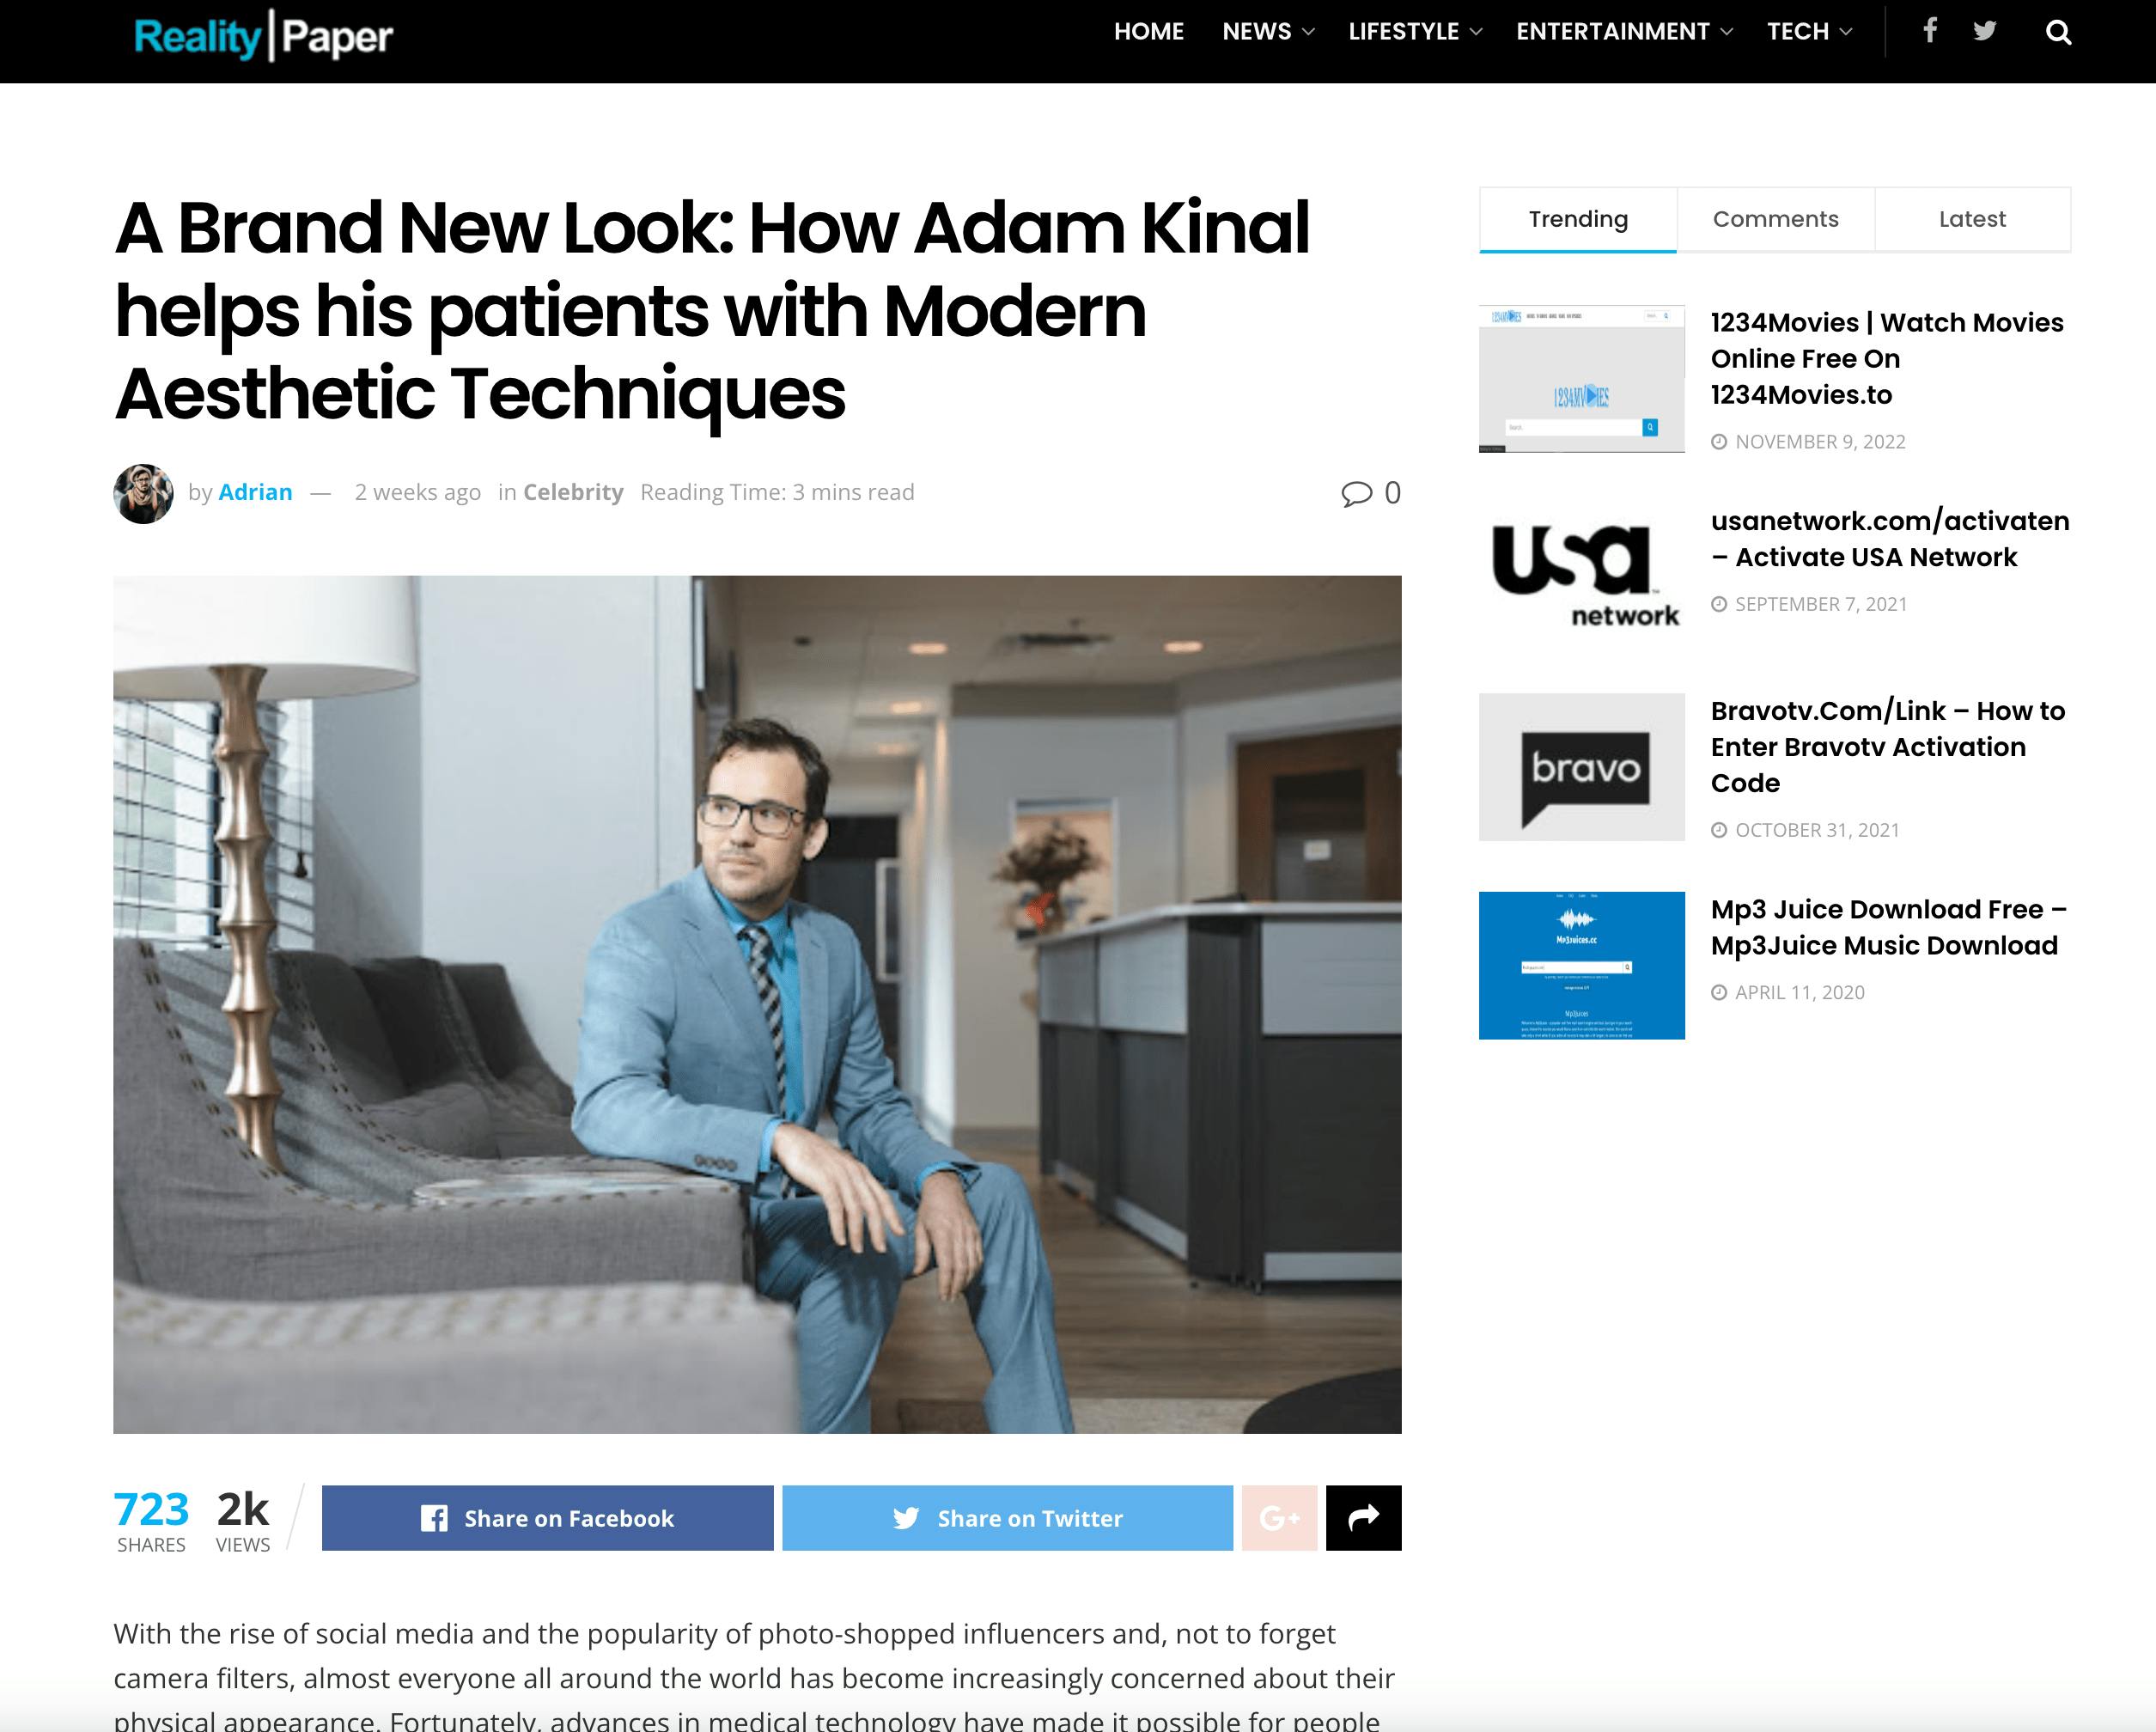 How Adam Kinal helps his patients with modern Aesthetic Techniques